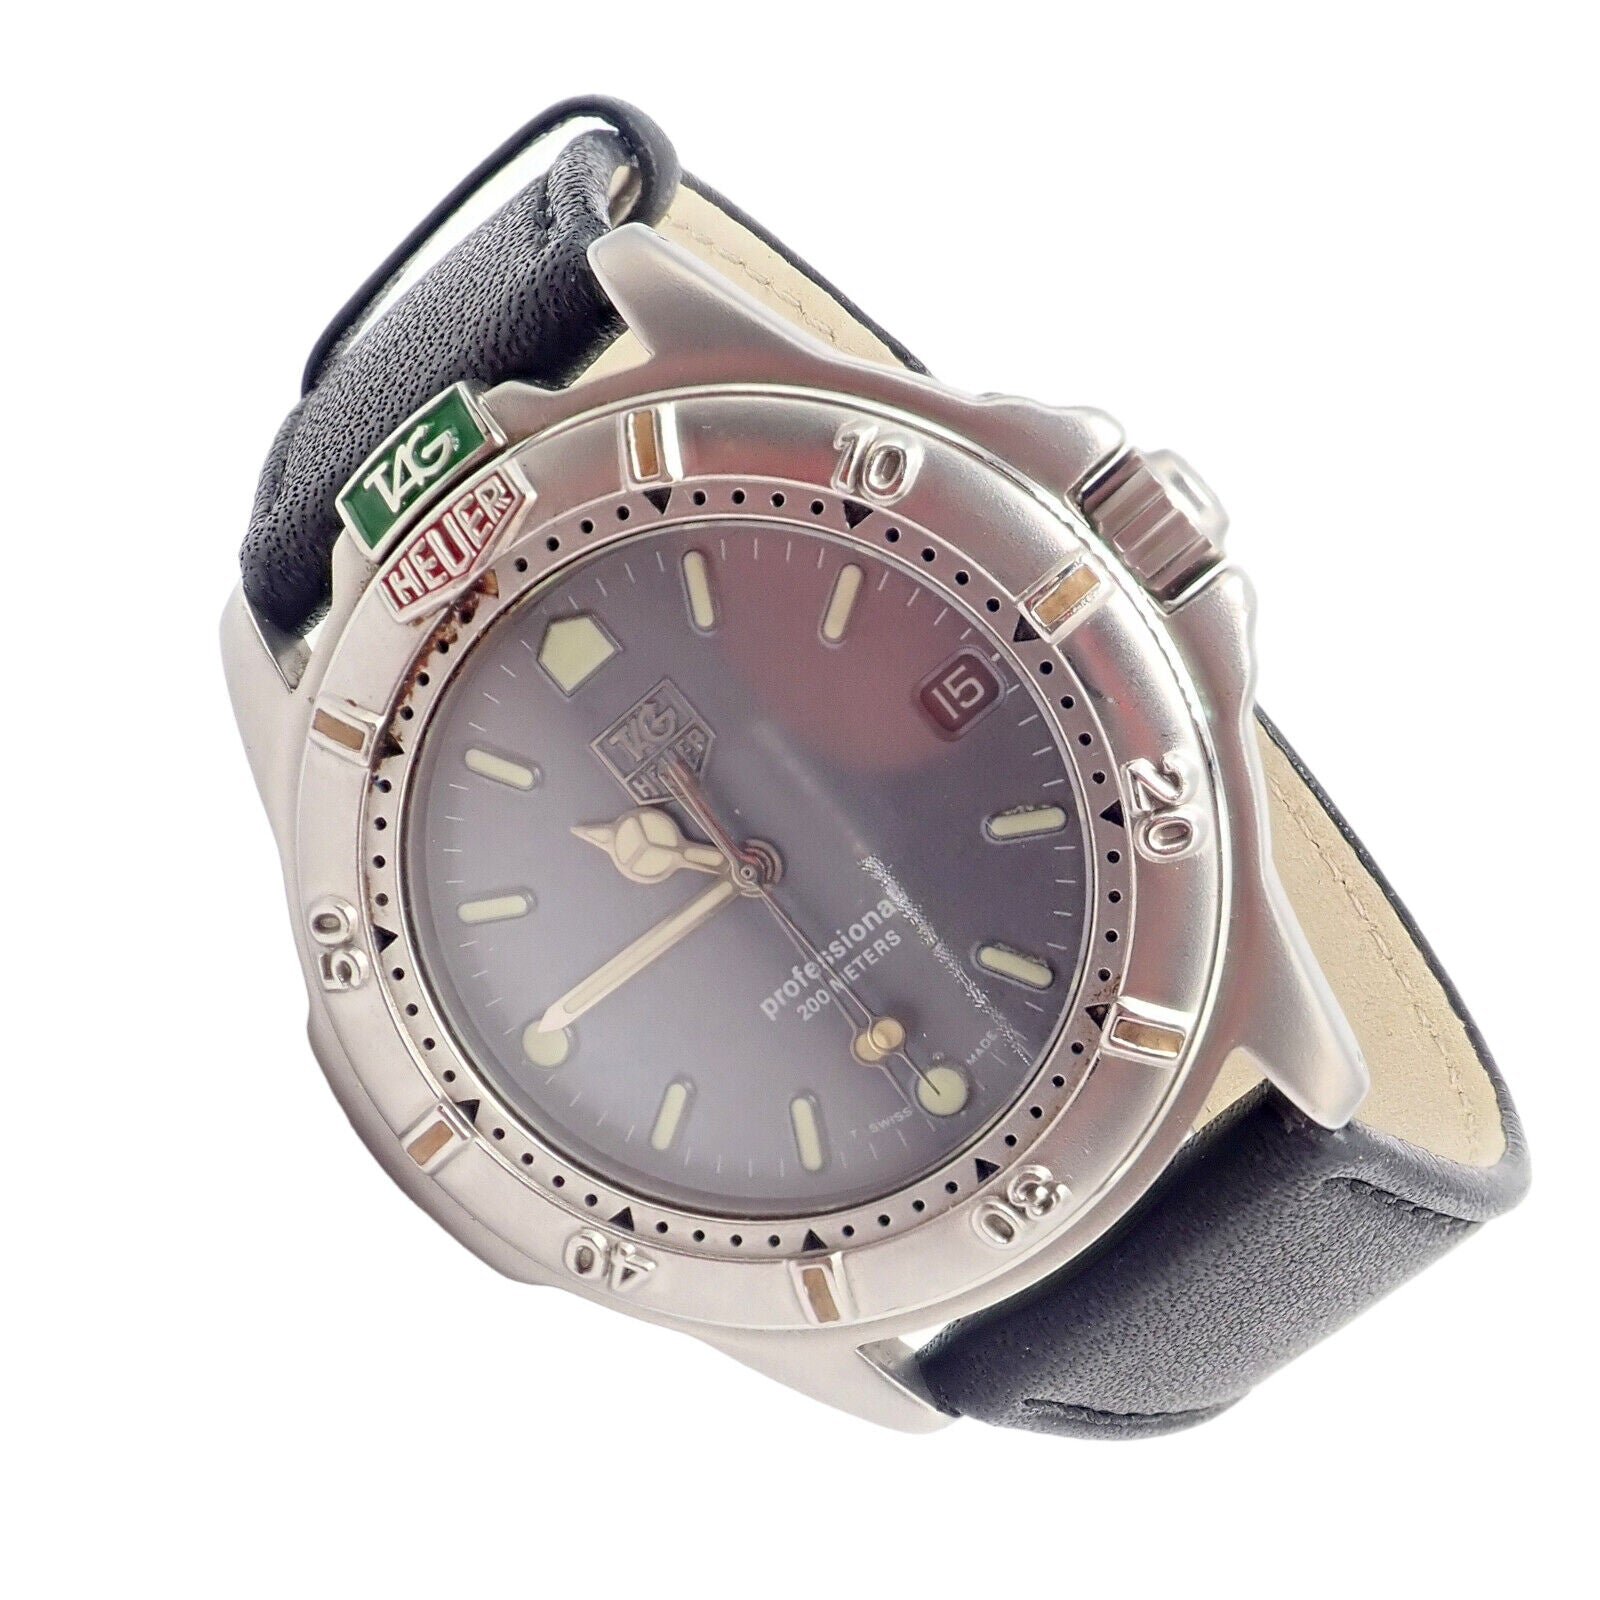 Buy Tag Heuer Luxury Watches for Men and Women at Johnson Watch Co.